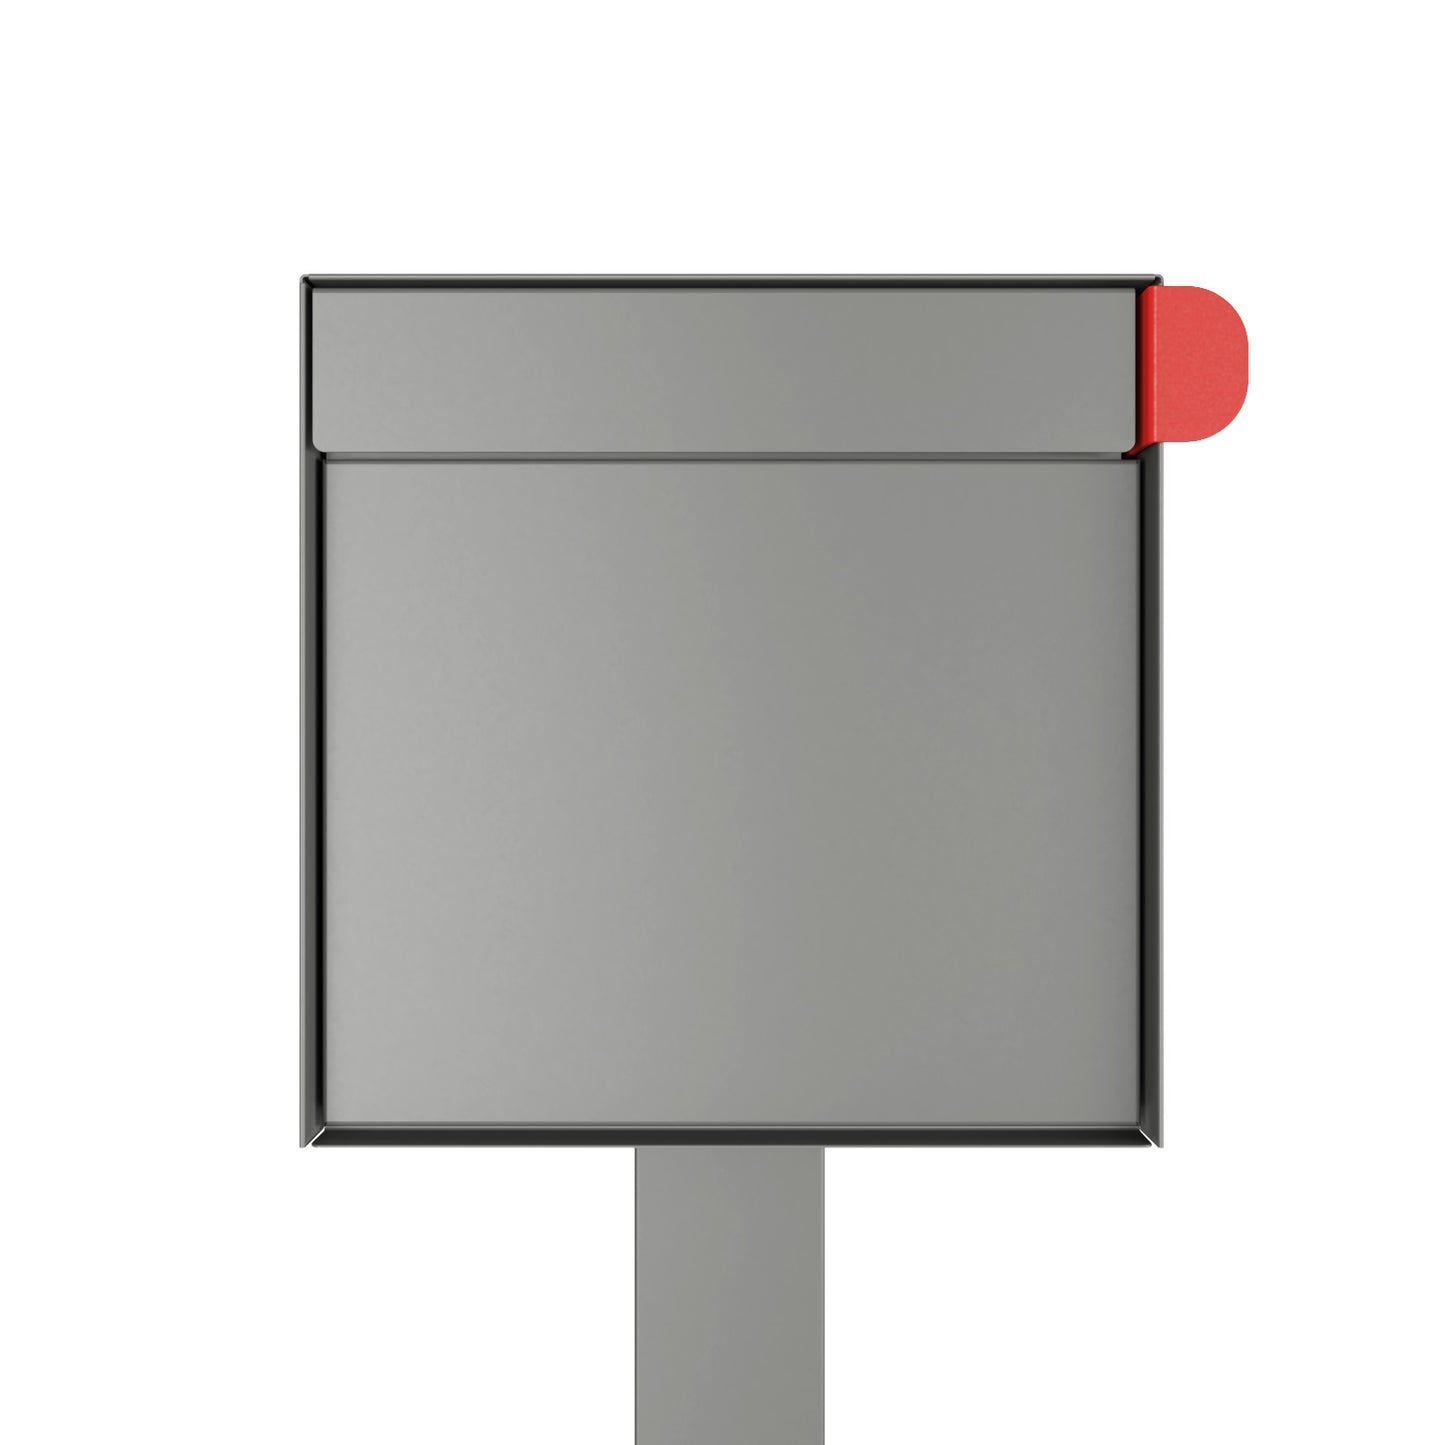 TOWN SQUARE Mailbox by Bravios - Large capacity mailbox with post - Gray